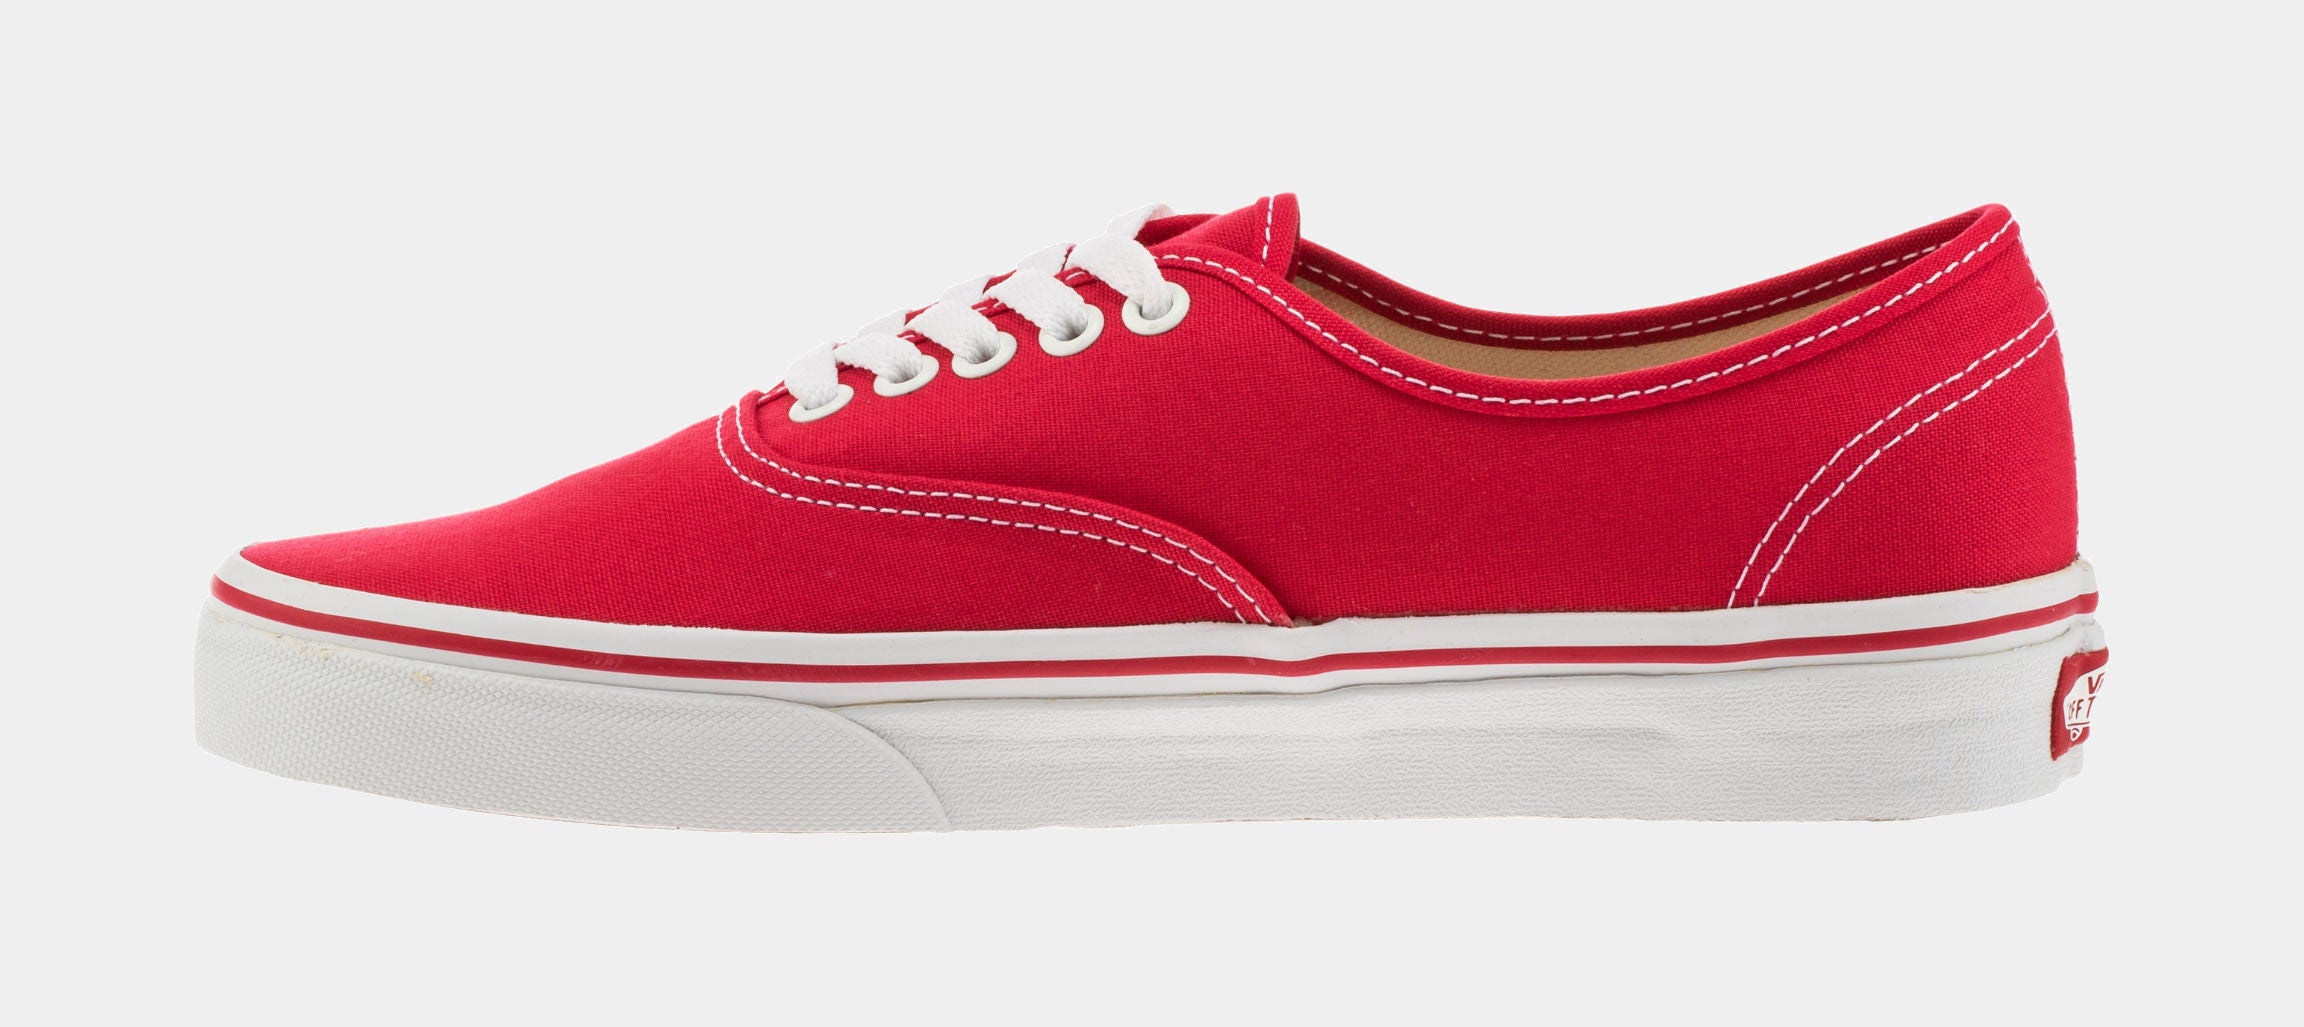 Authentic Mens Skate Shoes (Red)